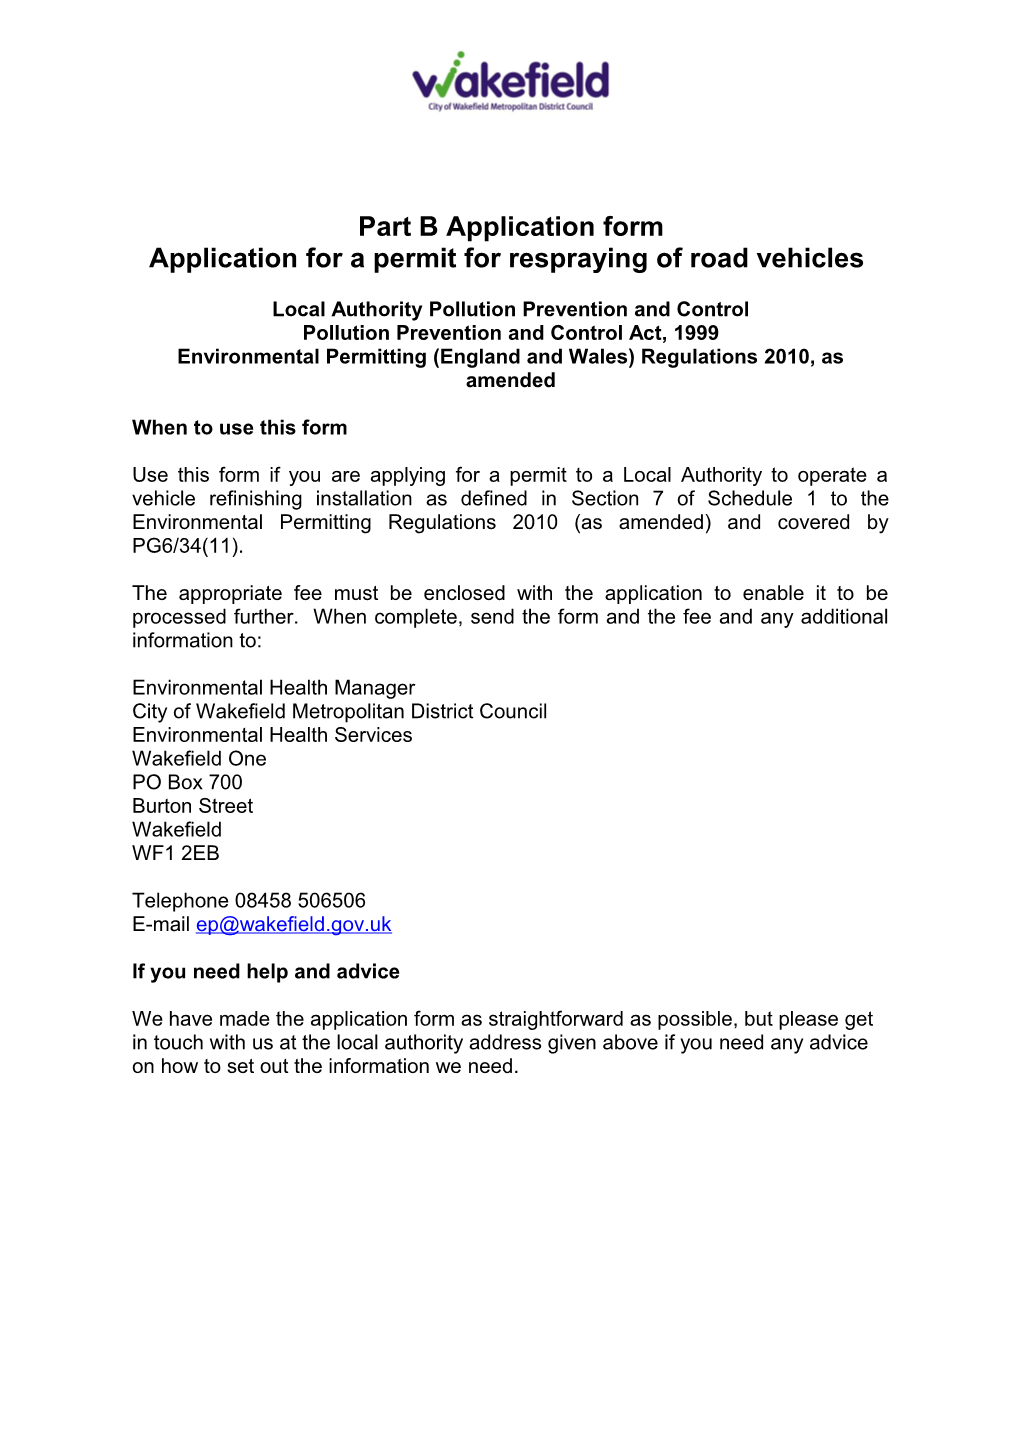 Integrated Pollution Prevention and Control Respraying of Road Vehicles - Application Form